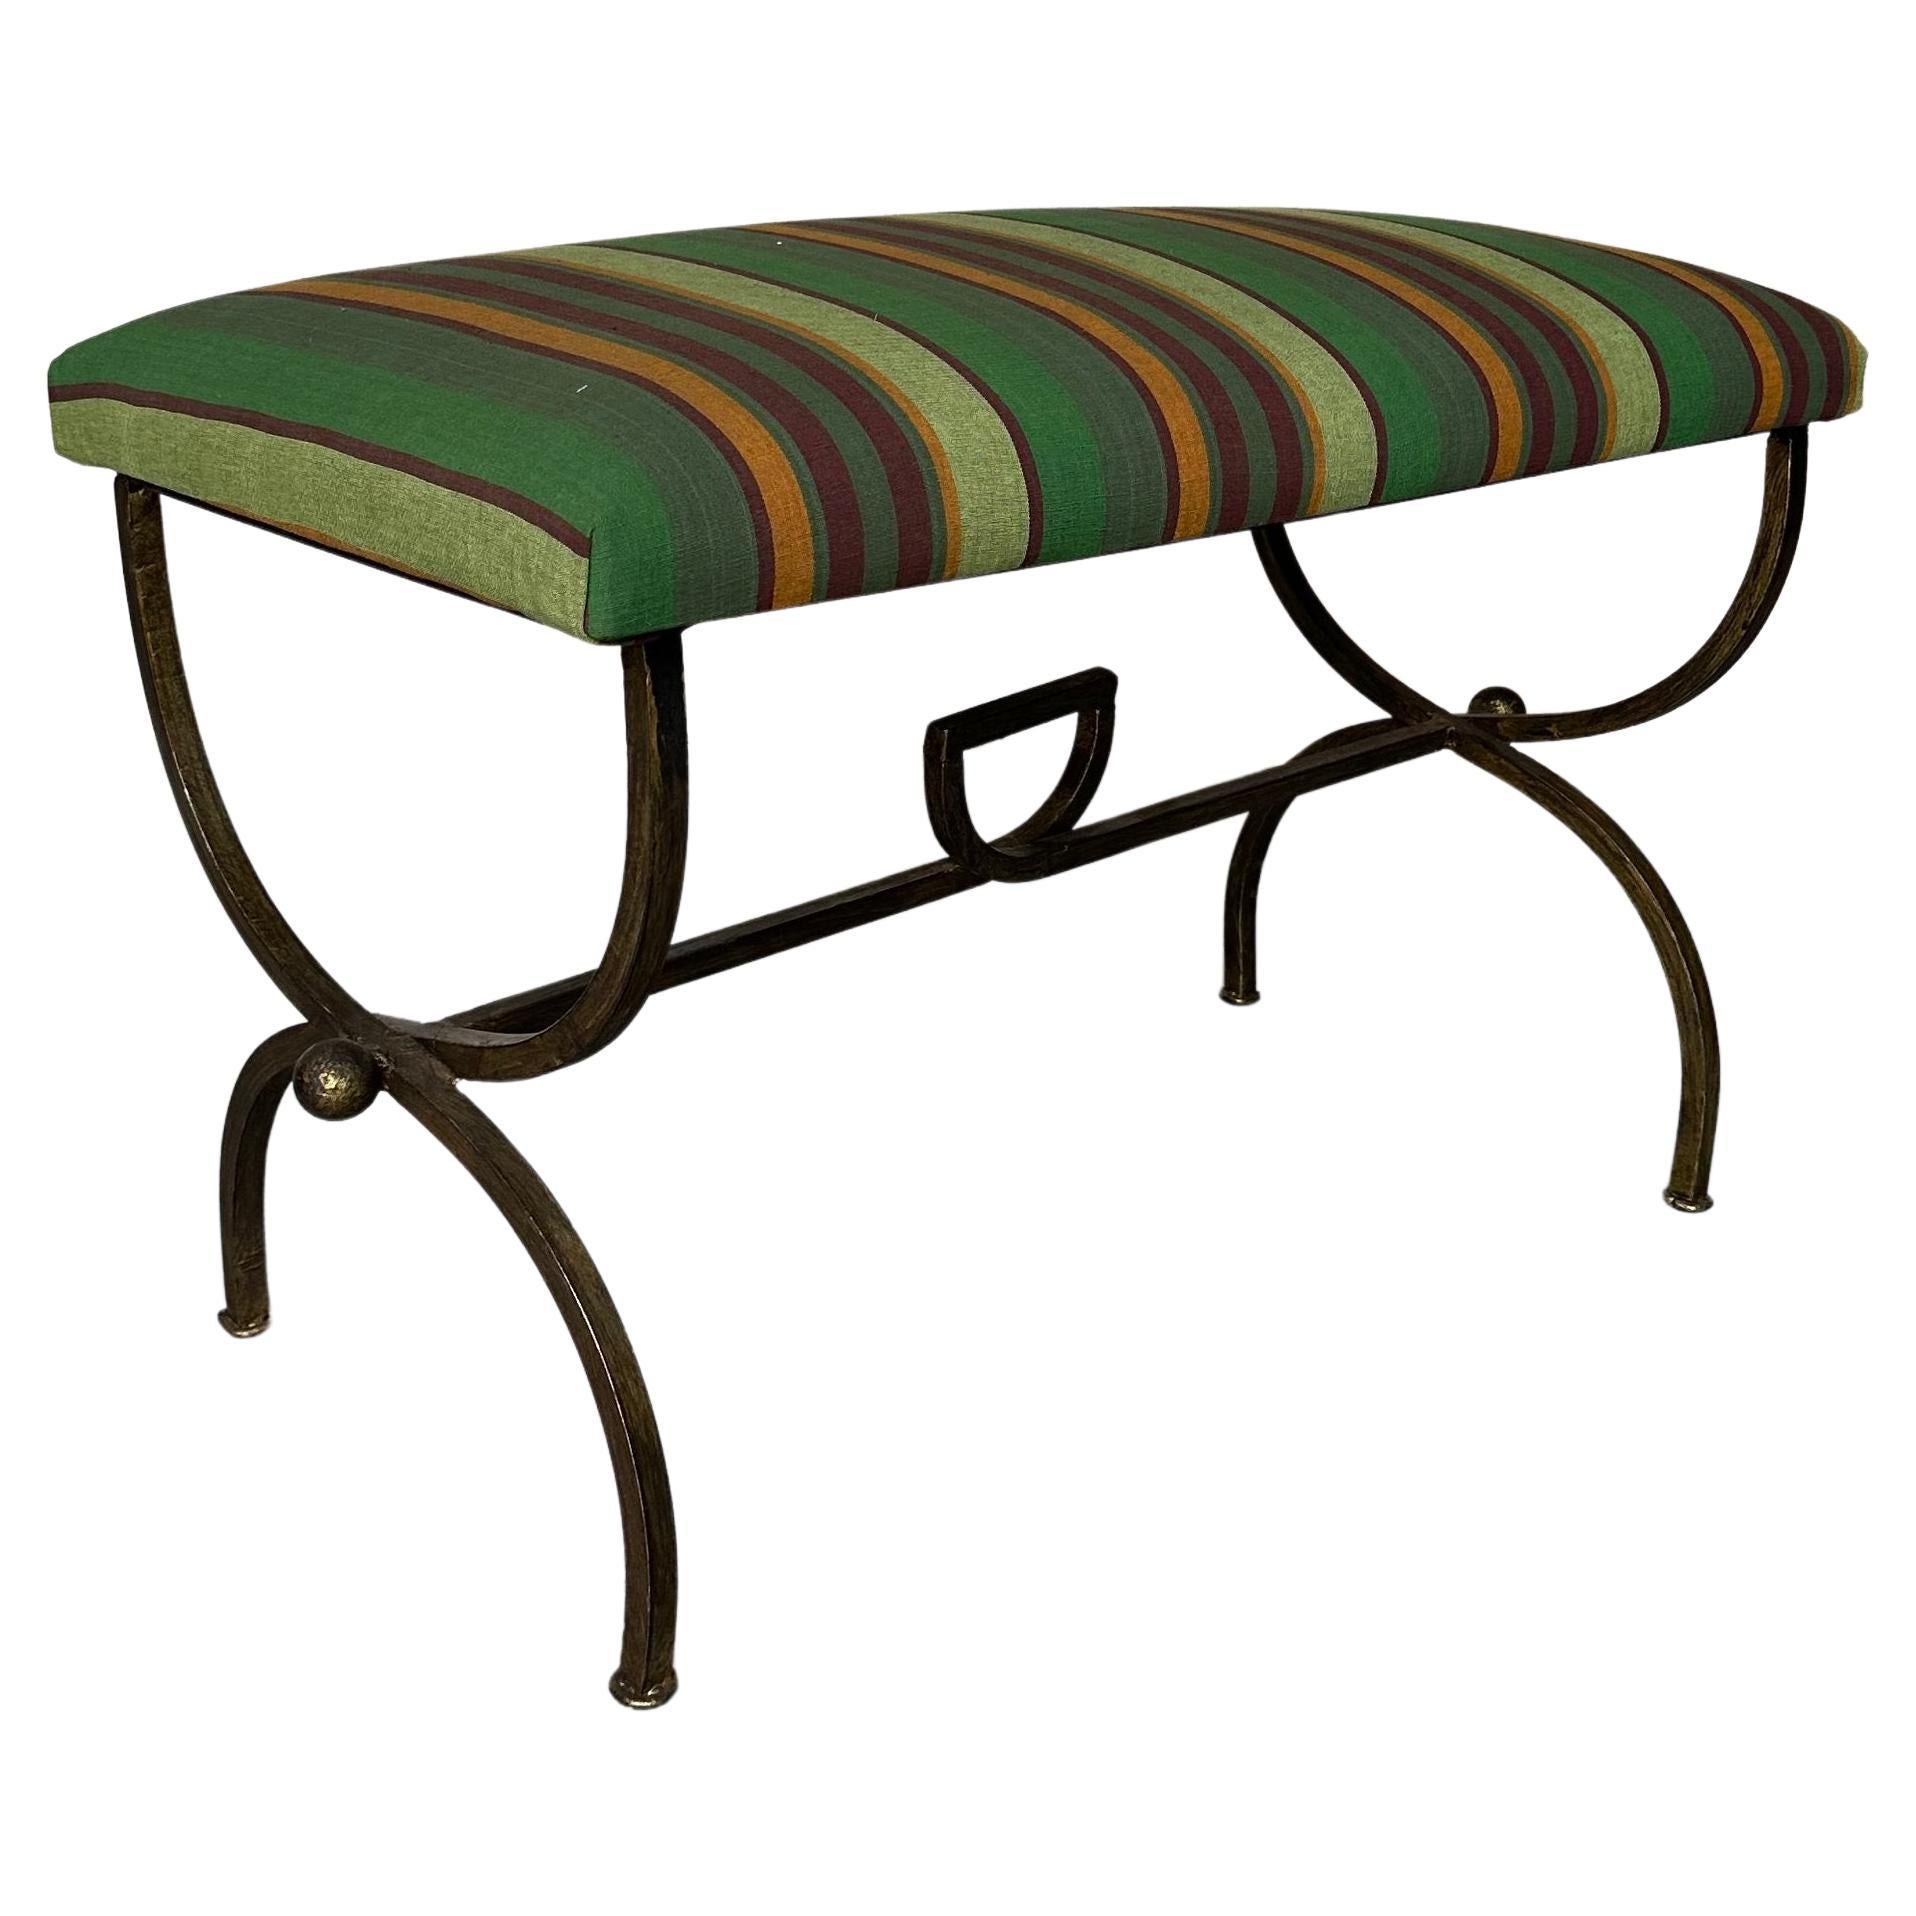 Gilt Iron Bench in Striped Fabric